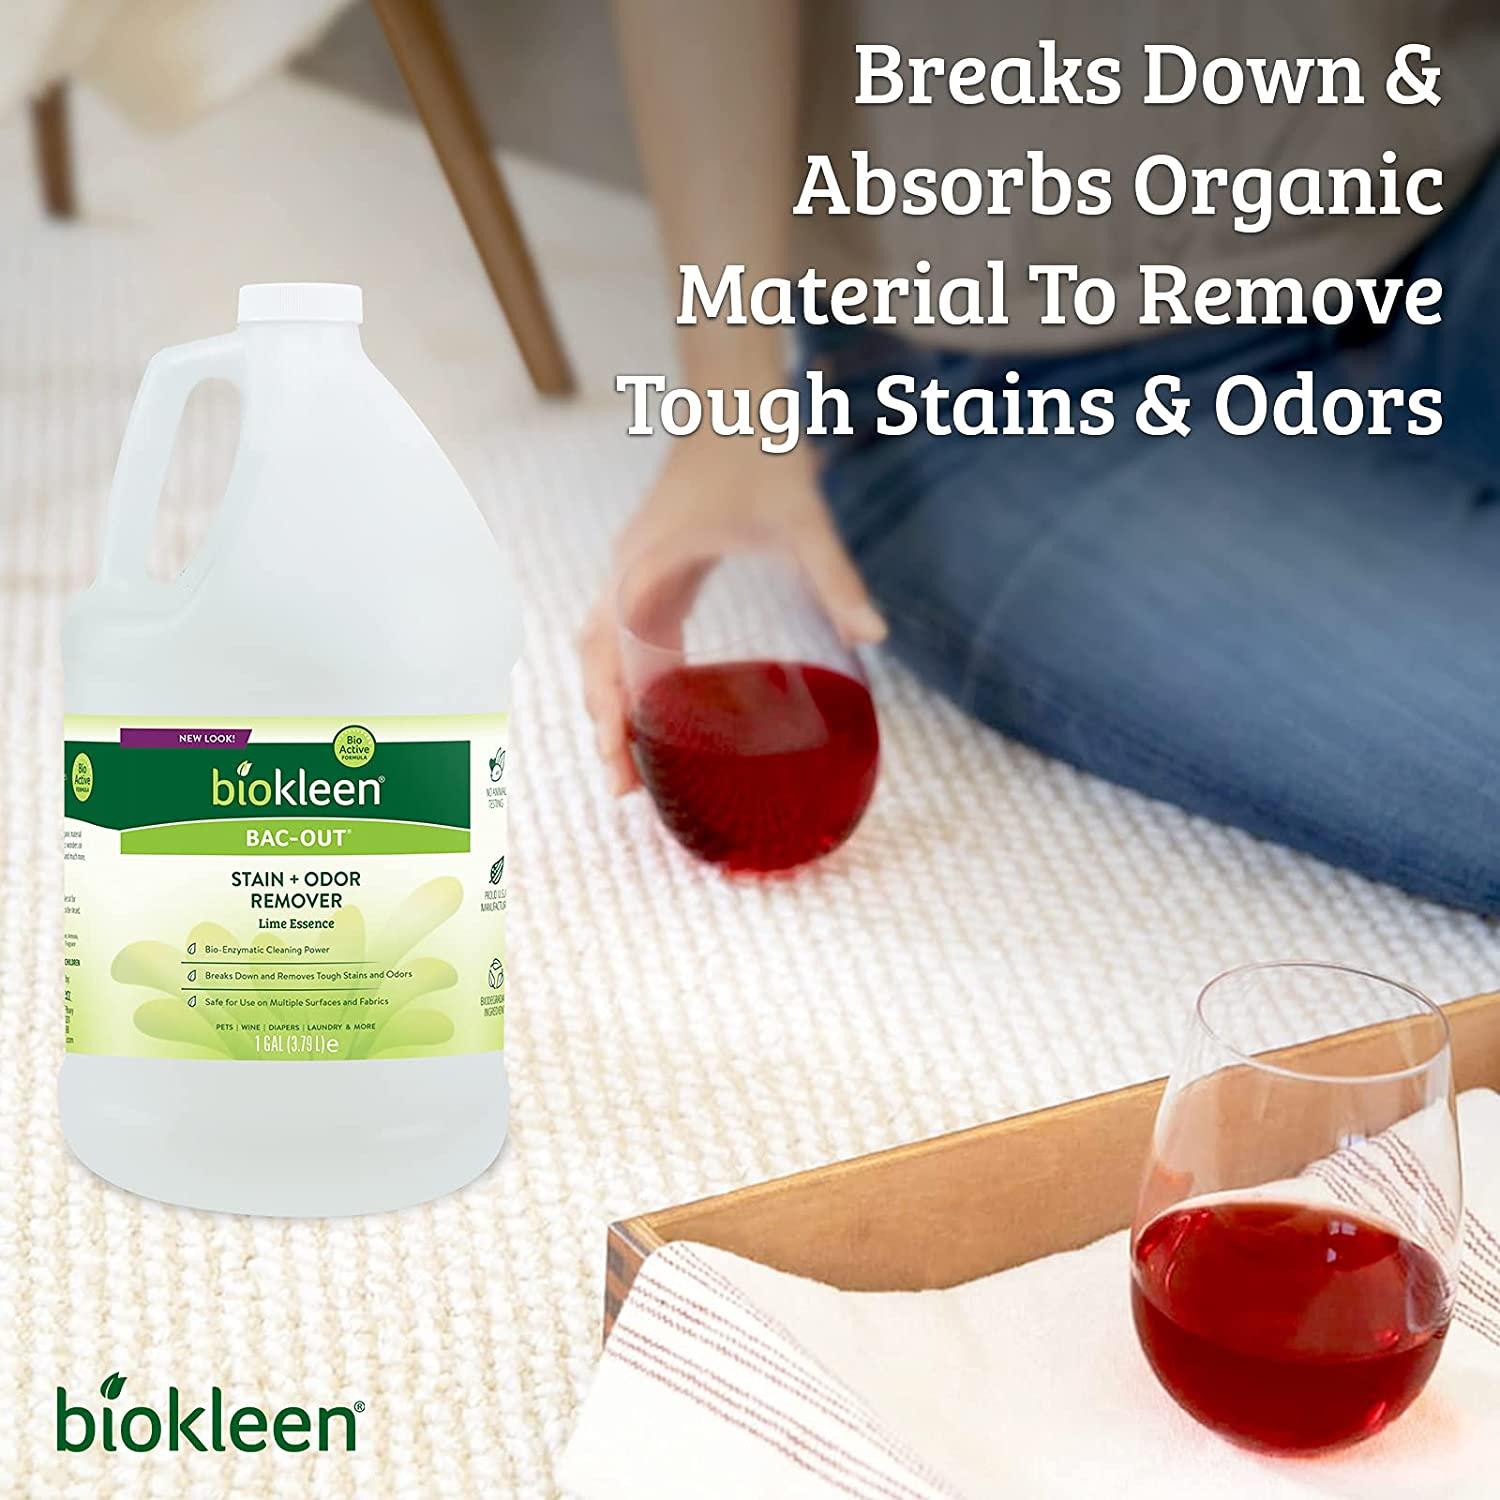 Biokleen Bac-Out Stain Remover for Clothes & Carpet - 128 Ounce - Enzyme,  Destroys Stains & Odors Safely, for Pet Stains, Laundry, Diapers, Wine,  Carpets - Eco-Friendly, Plant-Based